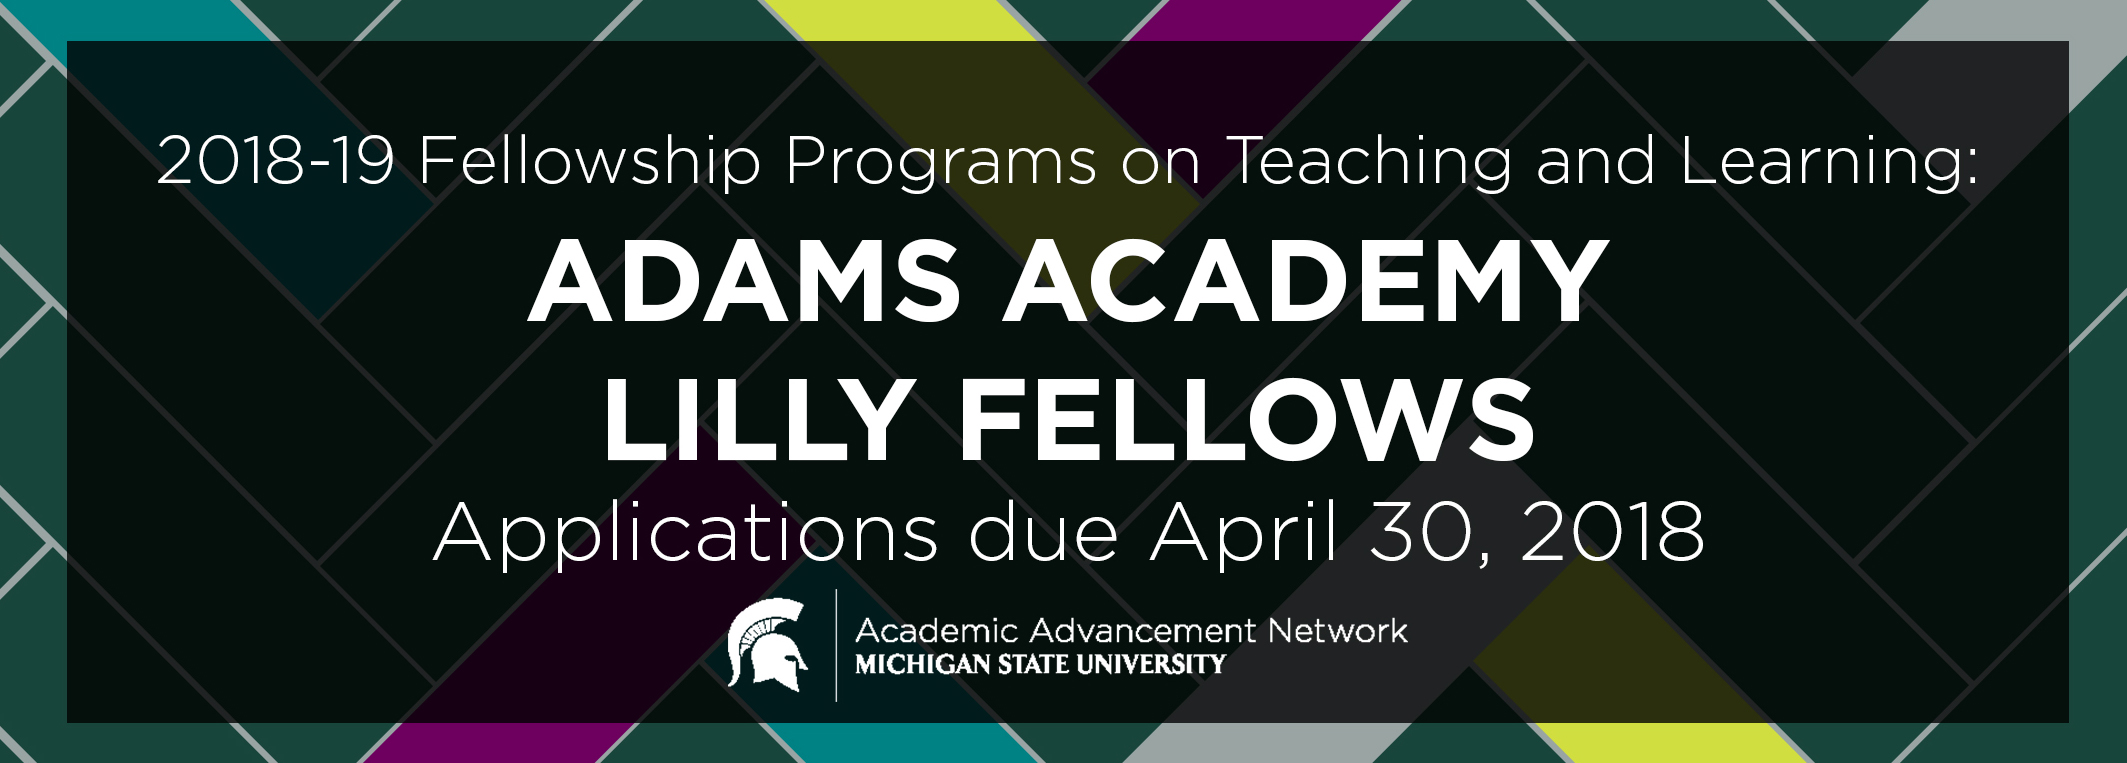 Promotional Image for Fellowship Programs on Teaching and Learning: Adams Academy and Lilly Fellows. Applications due April 30, 2018.